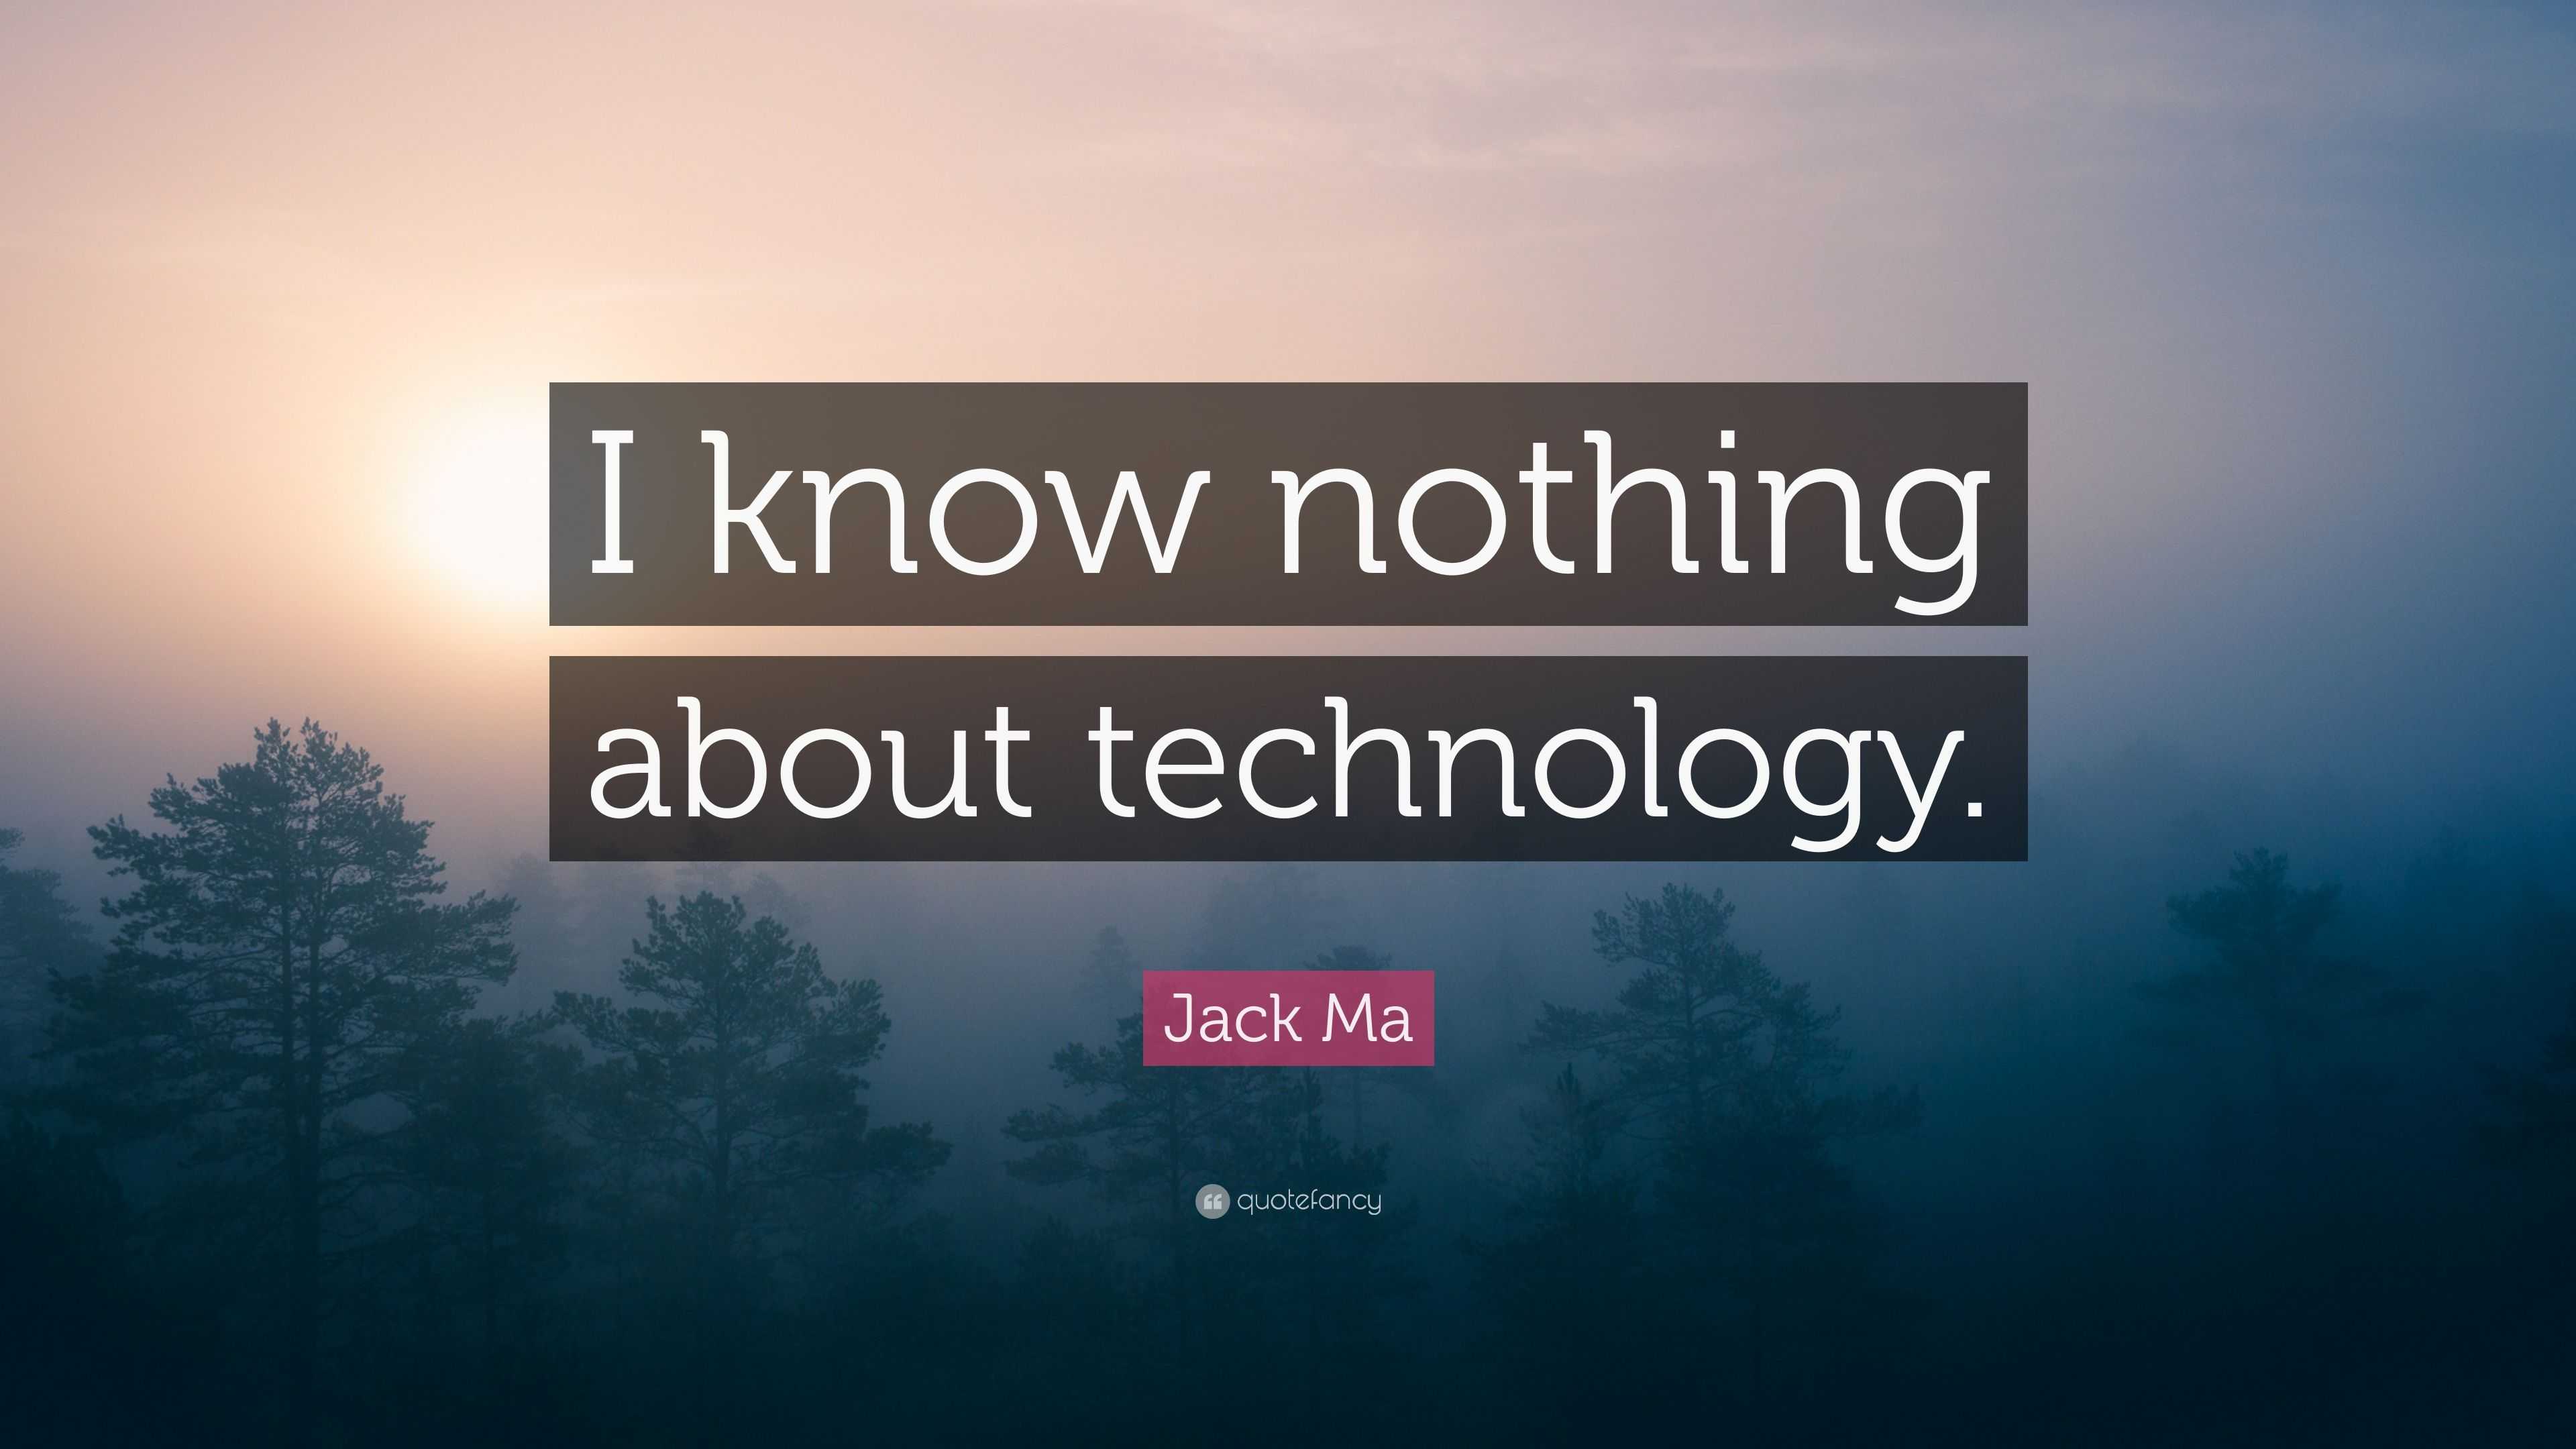 Jack Ma Quote: “I know nothing about technology.”